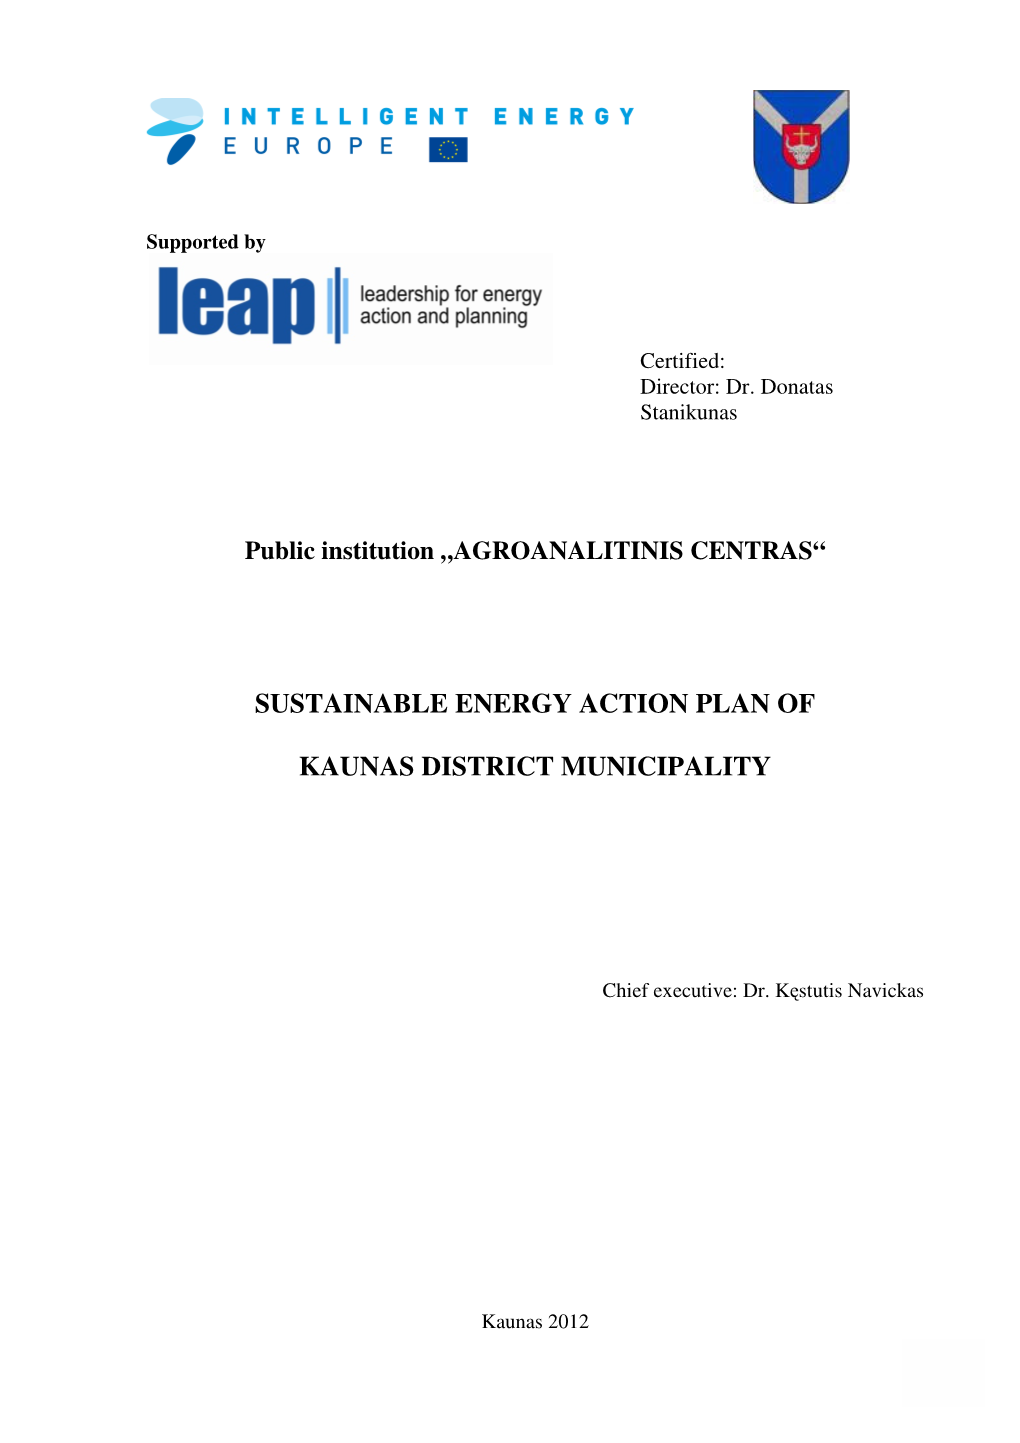 Sustainable Energy Action Plan of Kaunas District Municipality